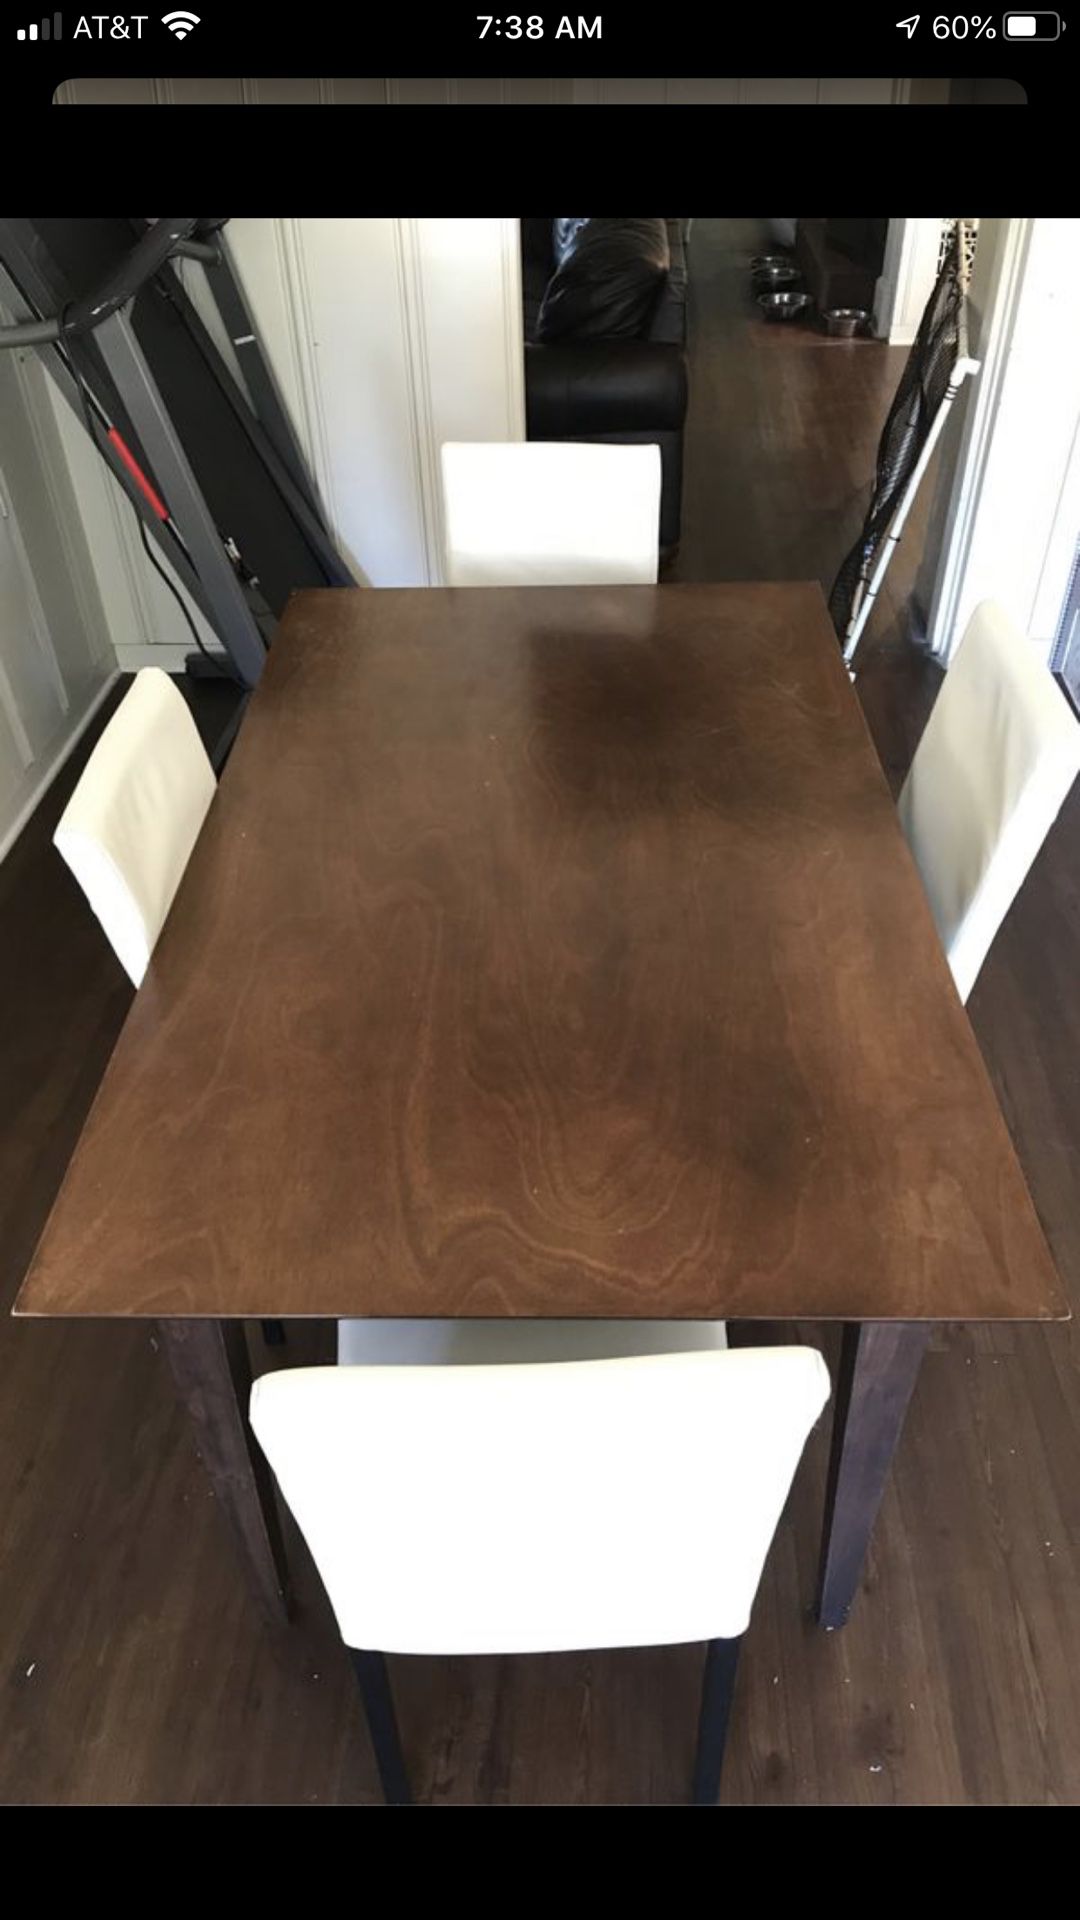 Kitchen dinning table with chairs